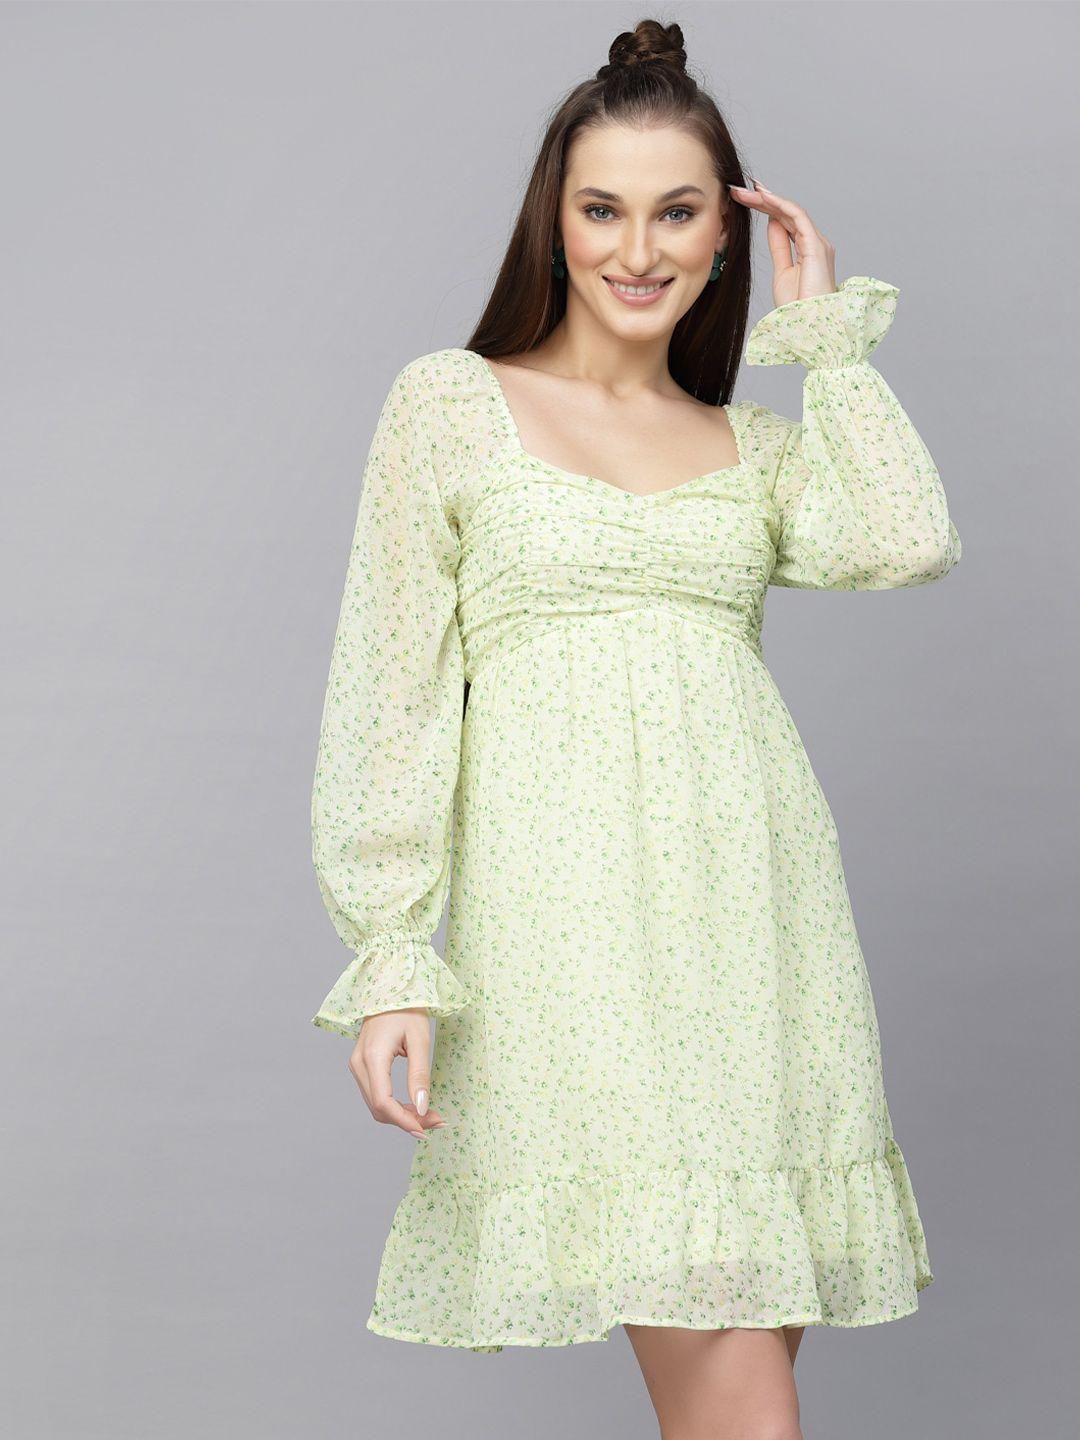 aayu floral printed gathered puff sleeves georgette empire dress